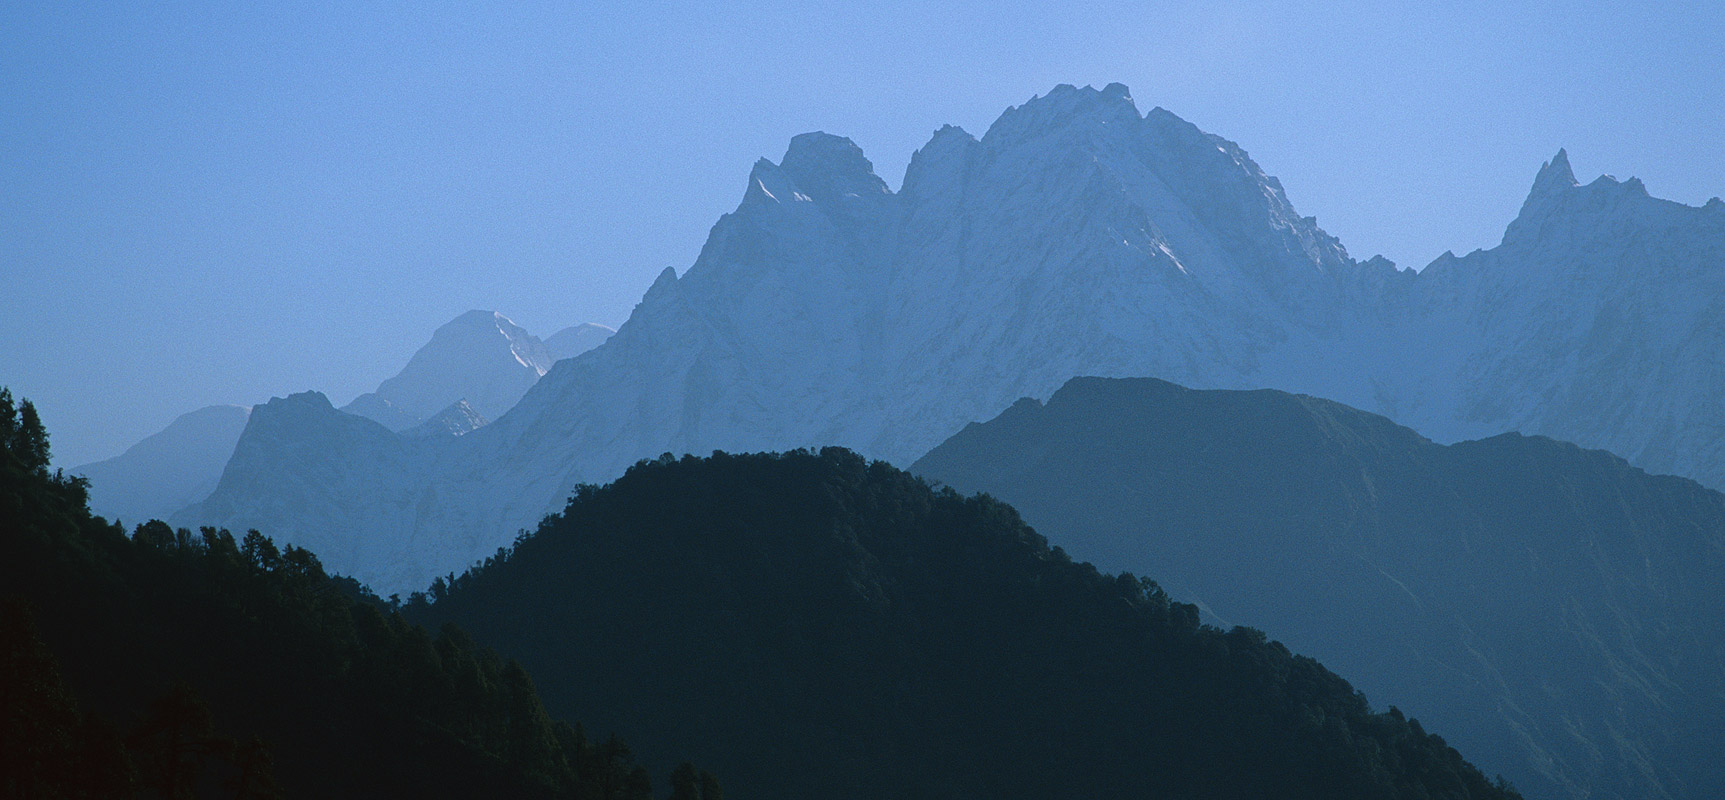 Early morning silhouette from the eastertn side of the Sudamkhan Khal passNikon F90X, 180mm, Fuji Velvia